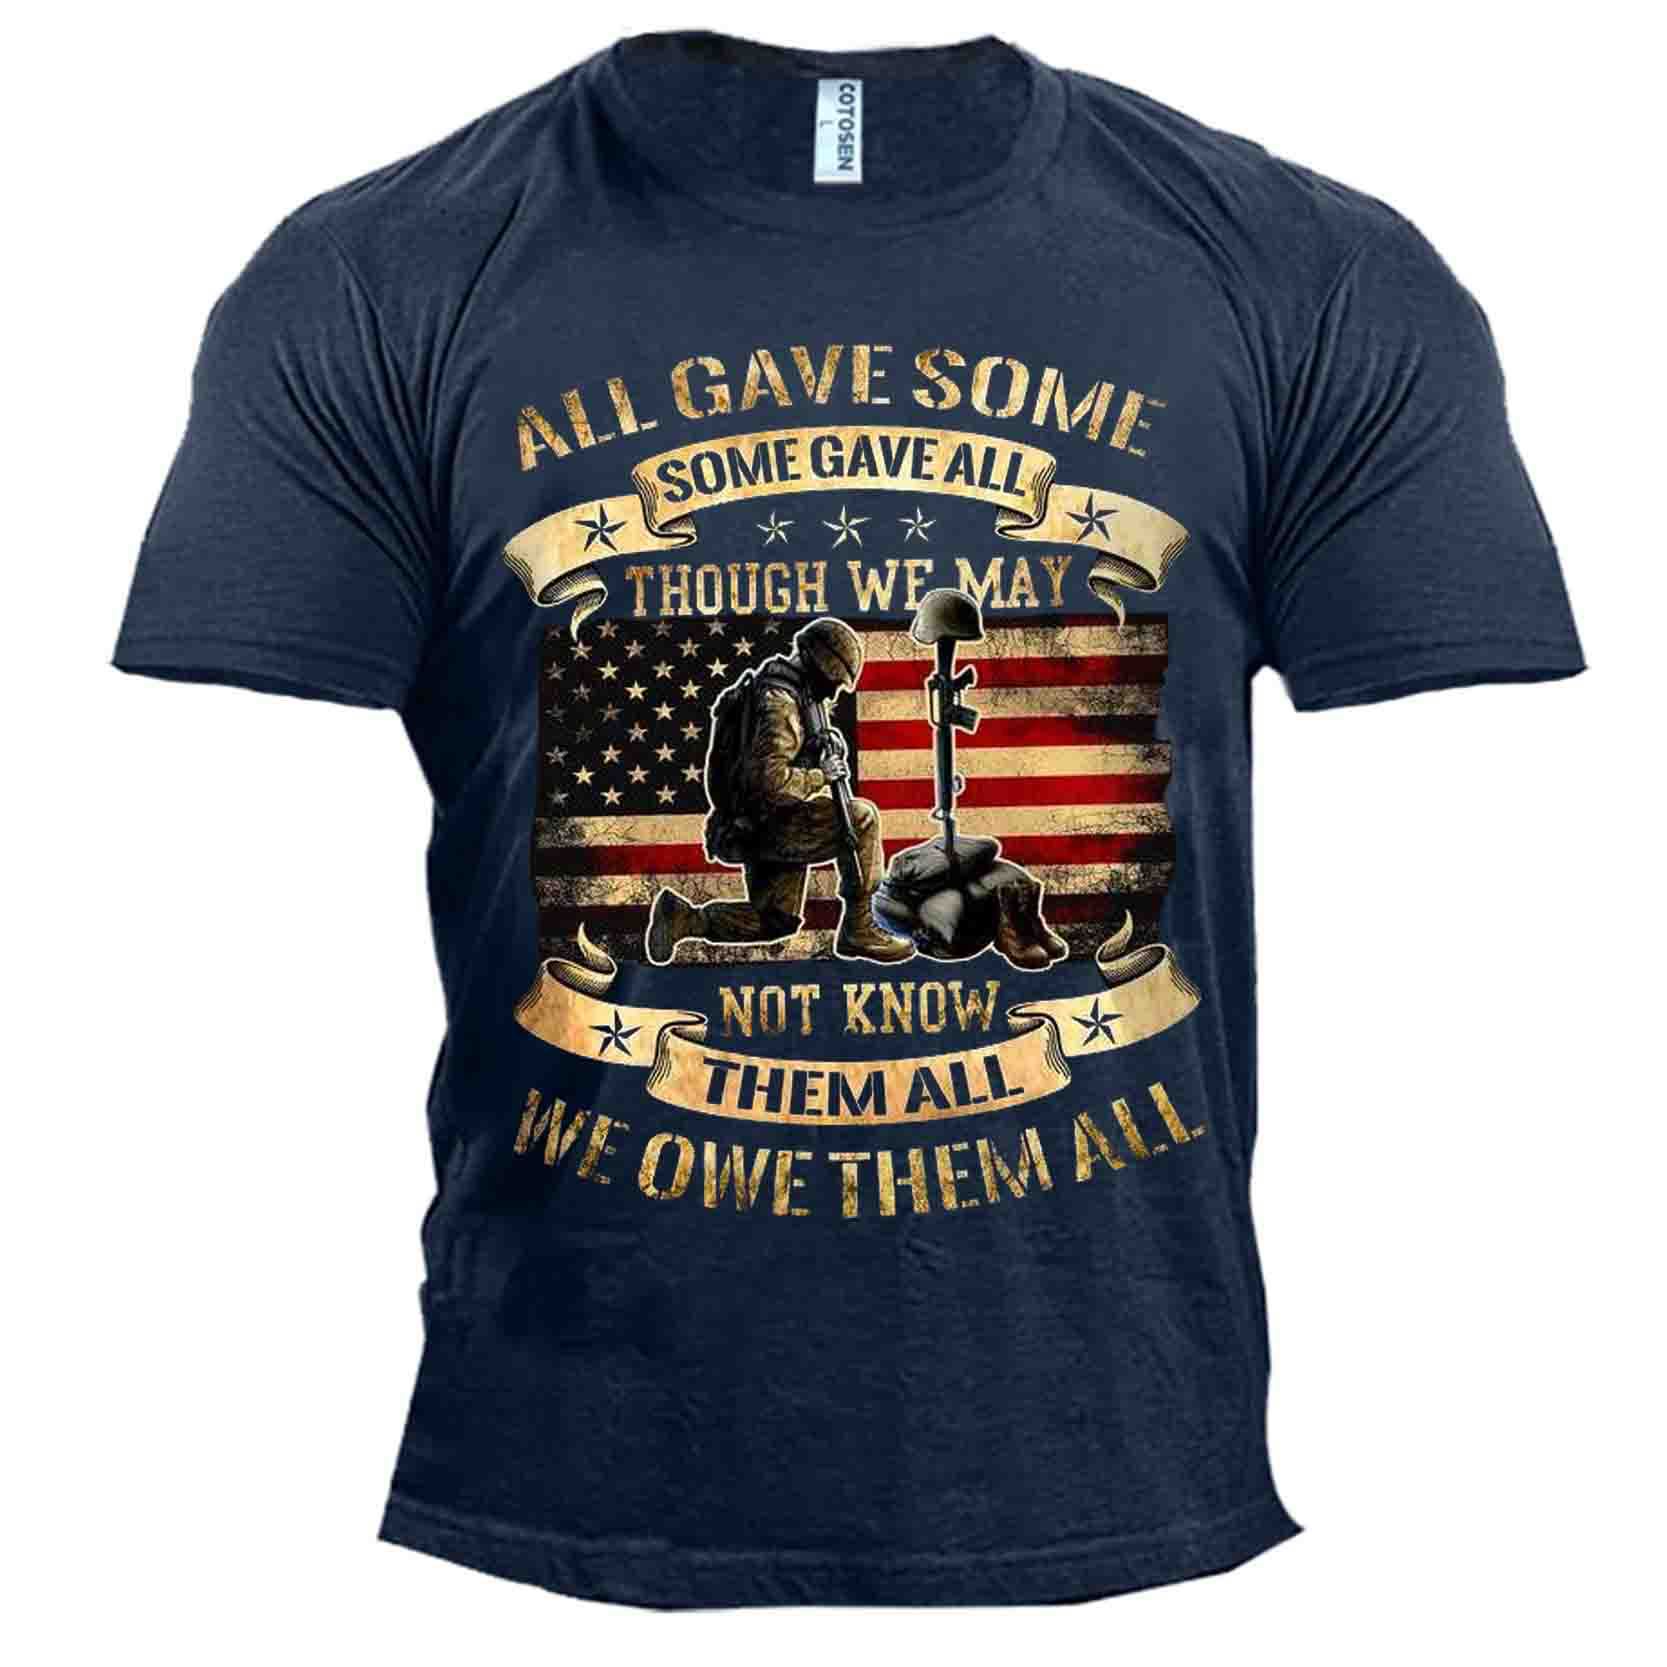 Men's Some Gave All Chic Though We May Veterans Print Cotton T-shirt